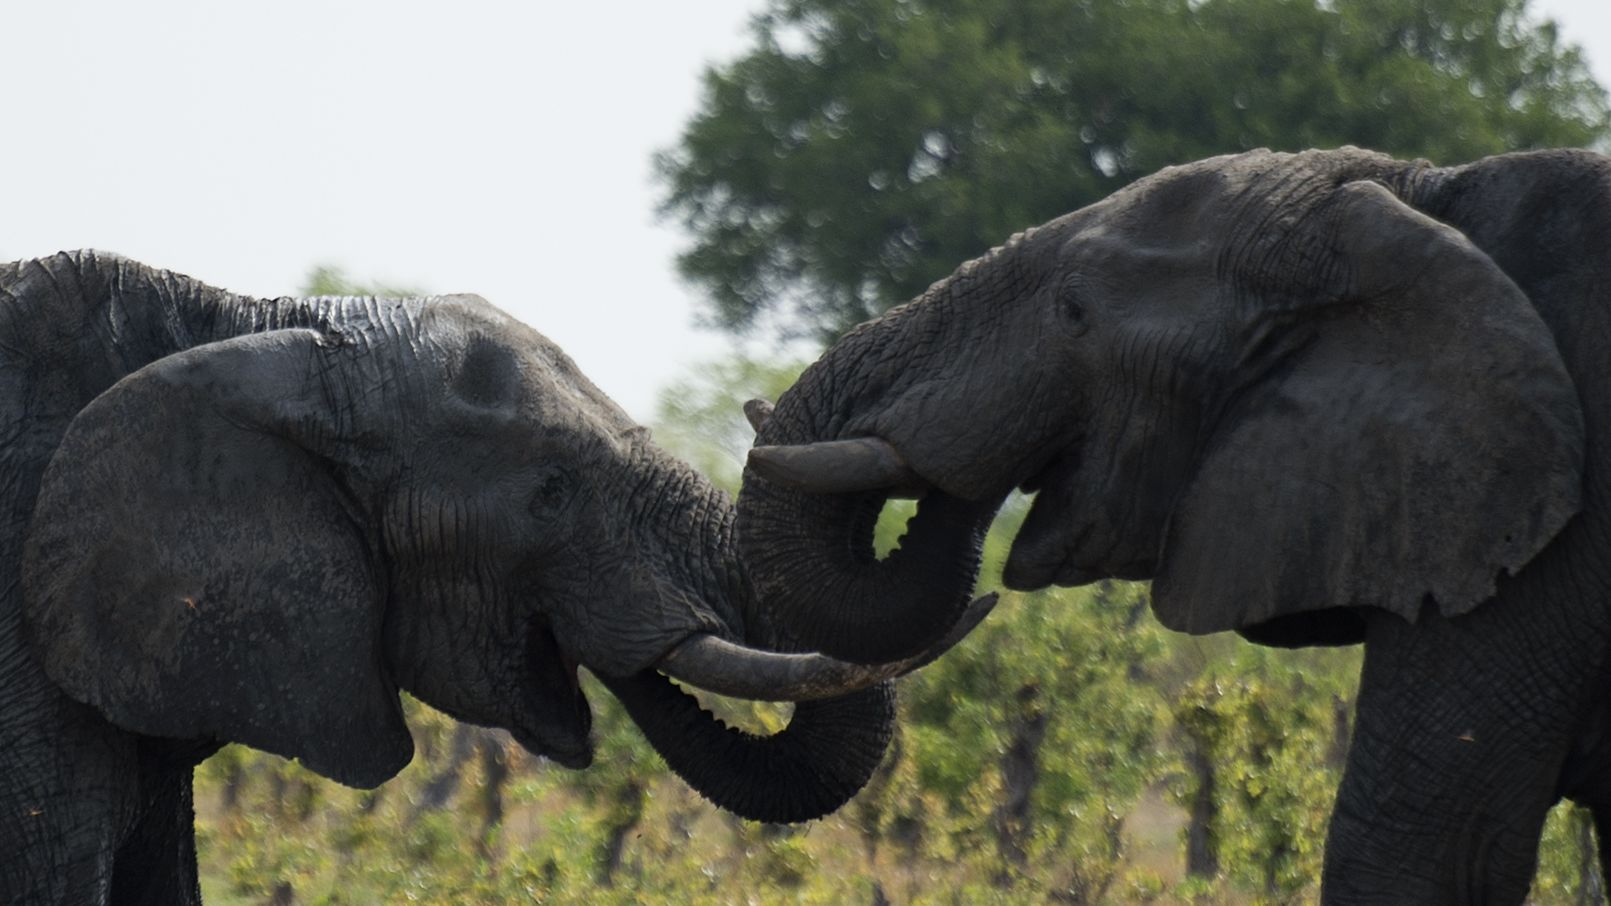 African elephants are pictured in Hwange National Park in Zimbabwe.